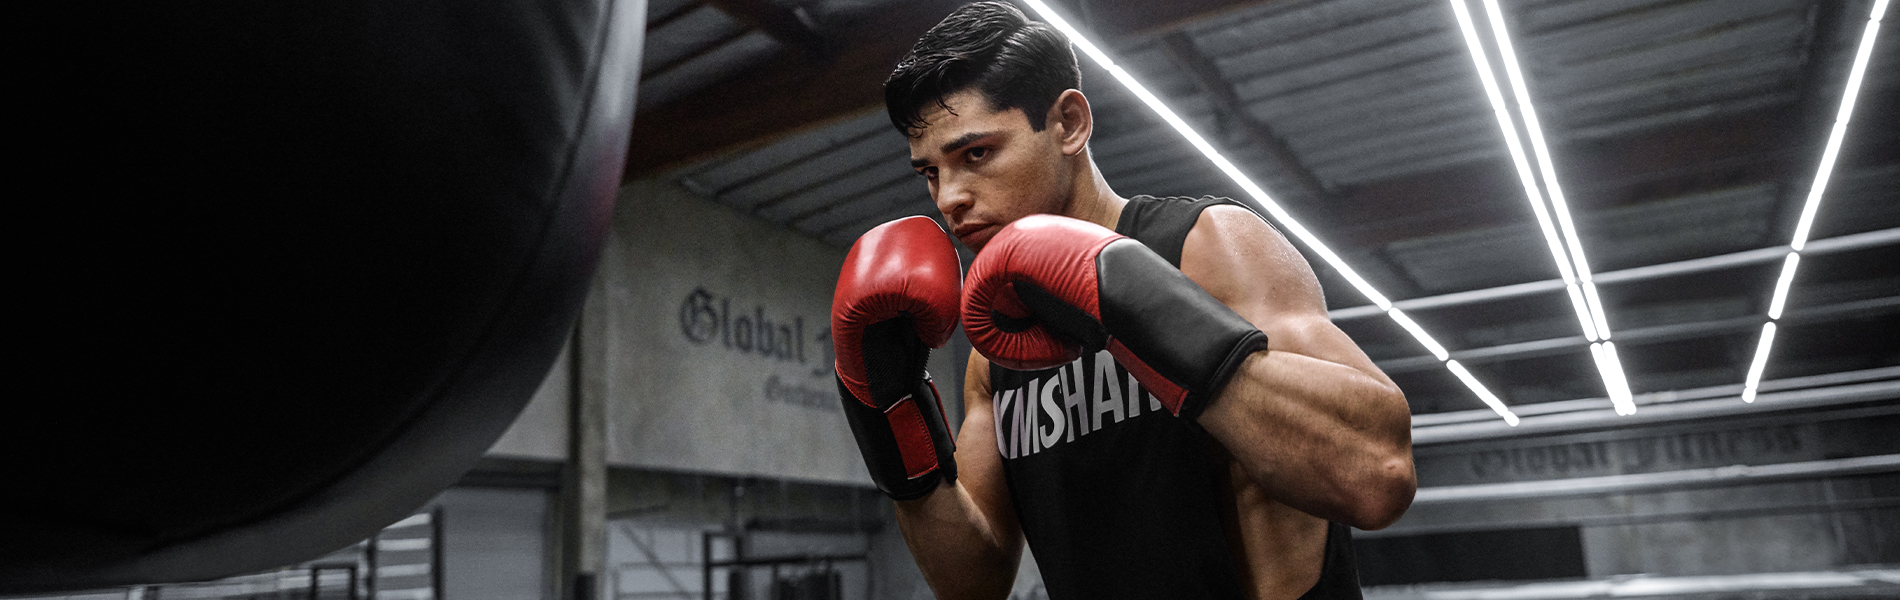 Gymshark Reveals Boxer Ryan Garcia's Inspiring Campaign Ahead of His  Comeback Fight - Yahoo Sports